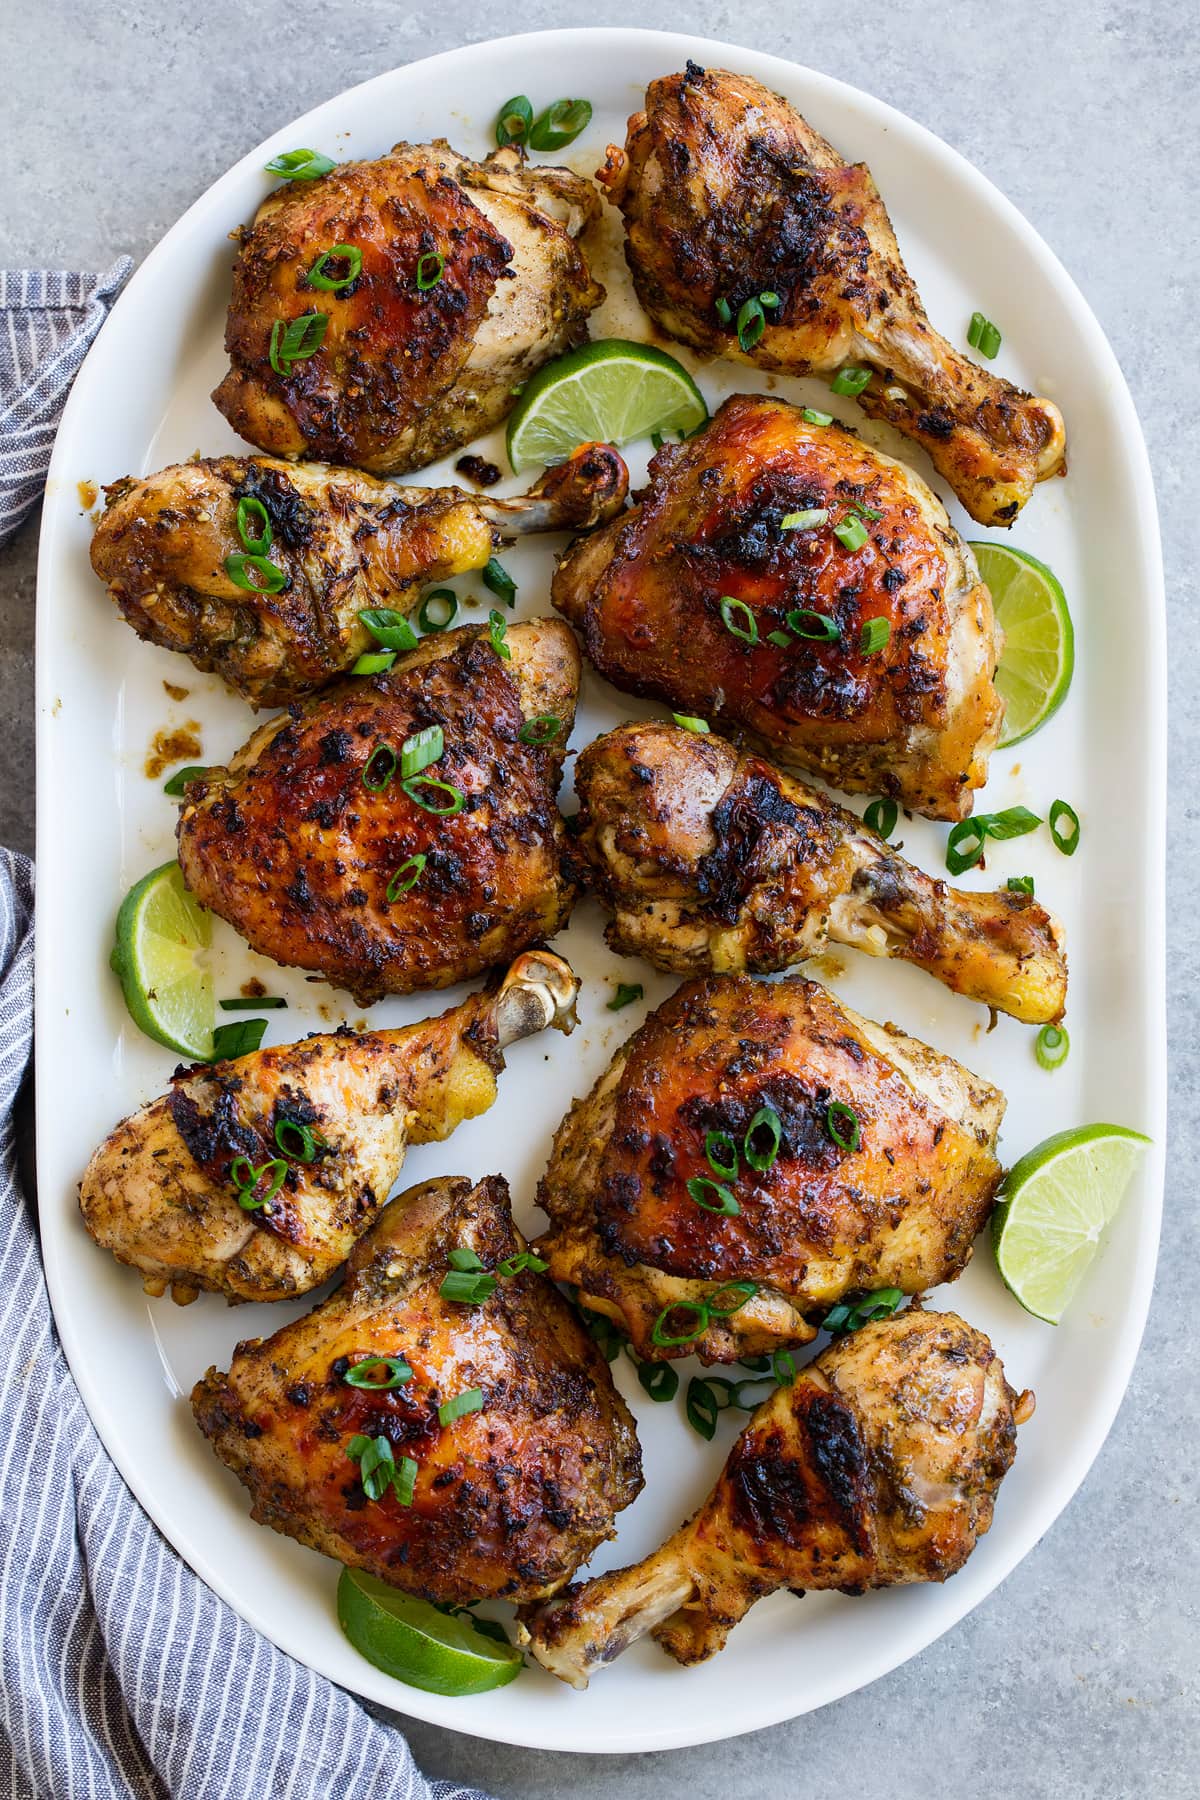 Jerk Chicken Recipe Oven Or Grill Method Cooking Classy,What Is Fondant Icing